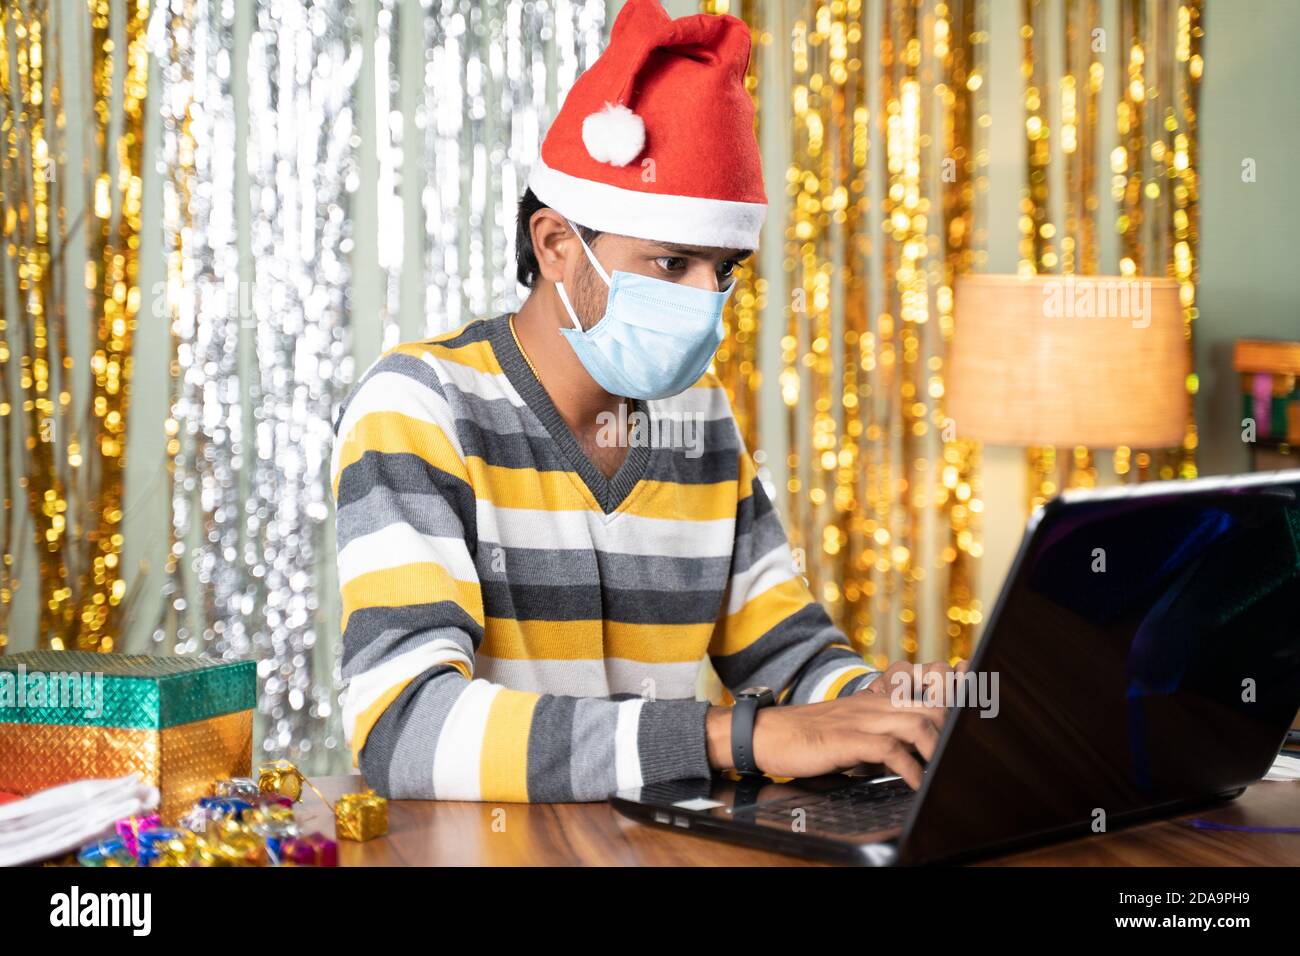 Young man in medical mask busy working on laptop during Christmas or new year celebration eve with decorated background and gifts in front - concept Stock Photo